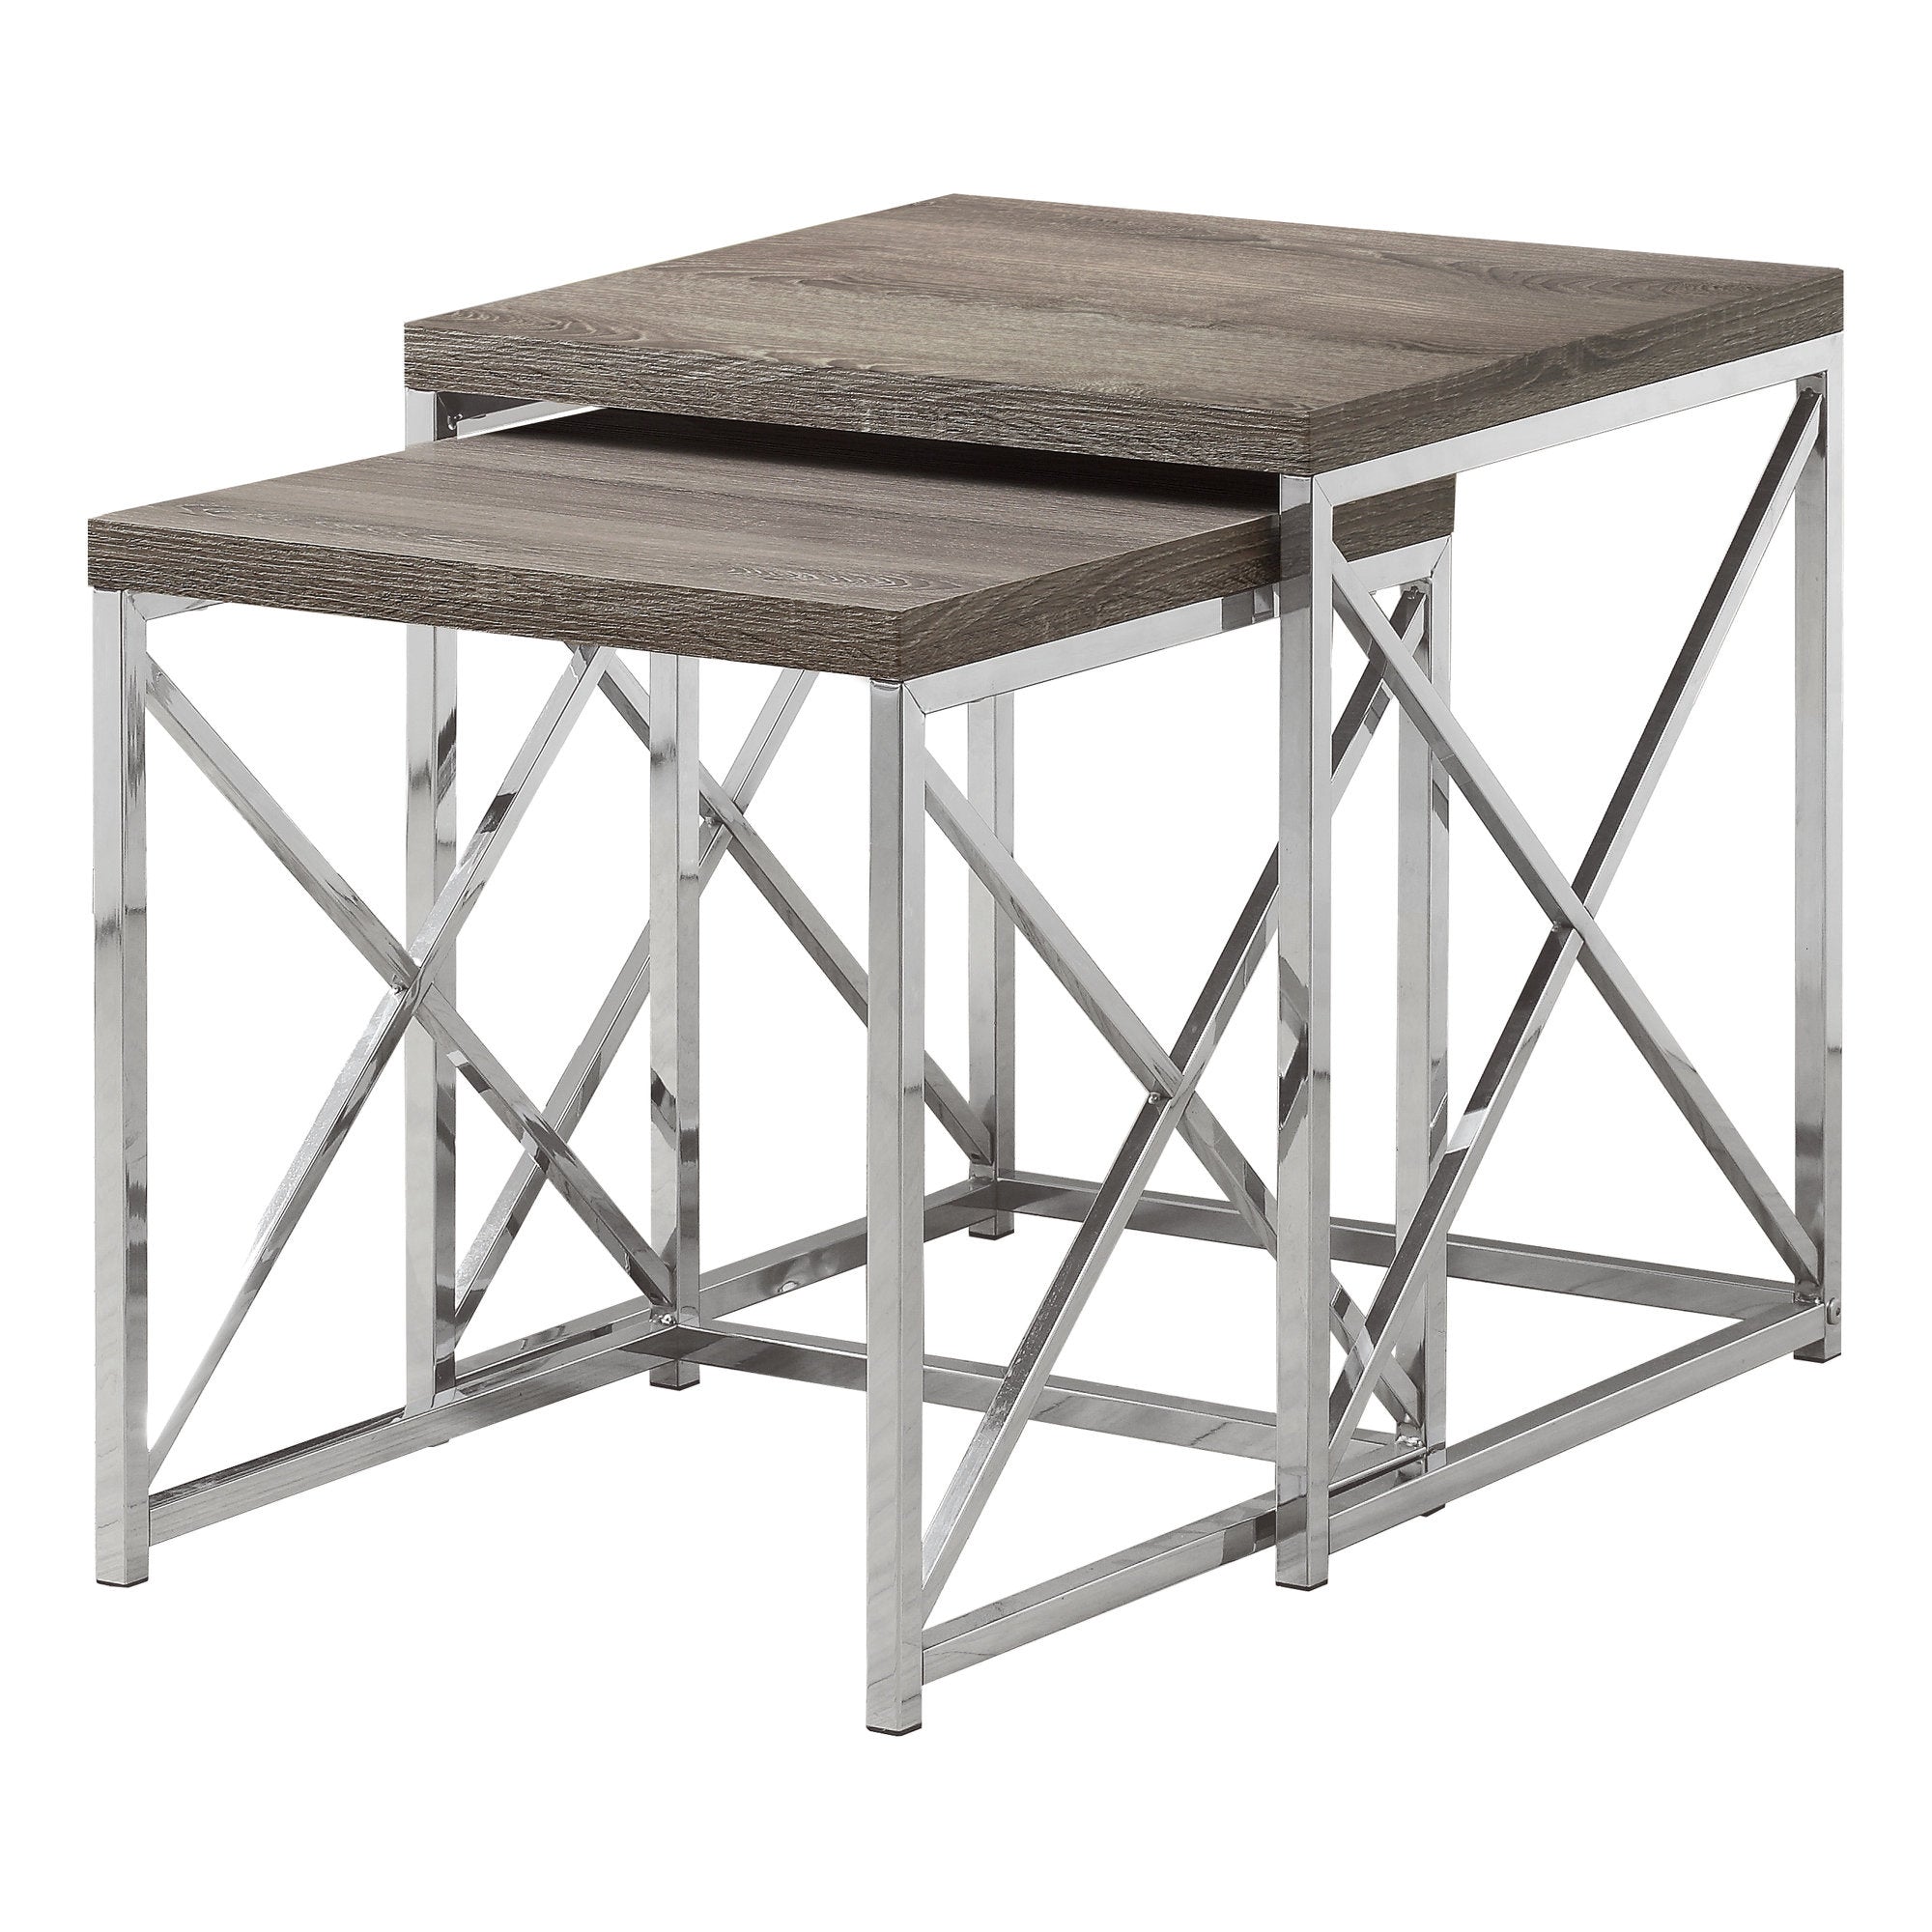 MN-913255    Nesting Table, Set Of 2, Side, End, Metal, Accent, Living Room, Bedroom, Metal Base, Laminate, Dark Taupe, Chrome, Contemporary, Modern